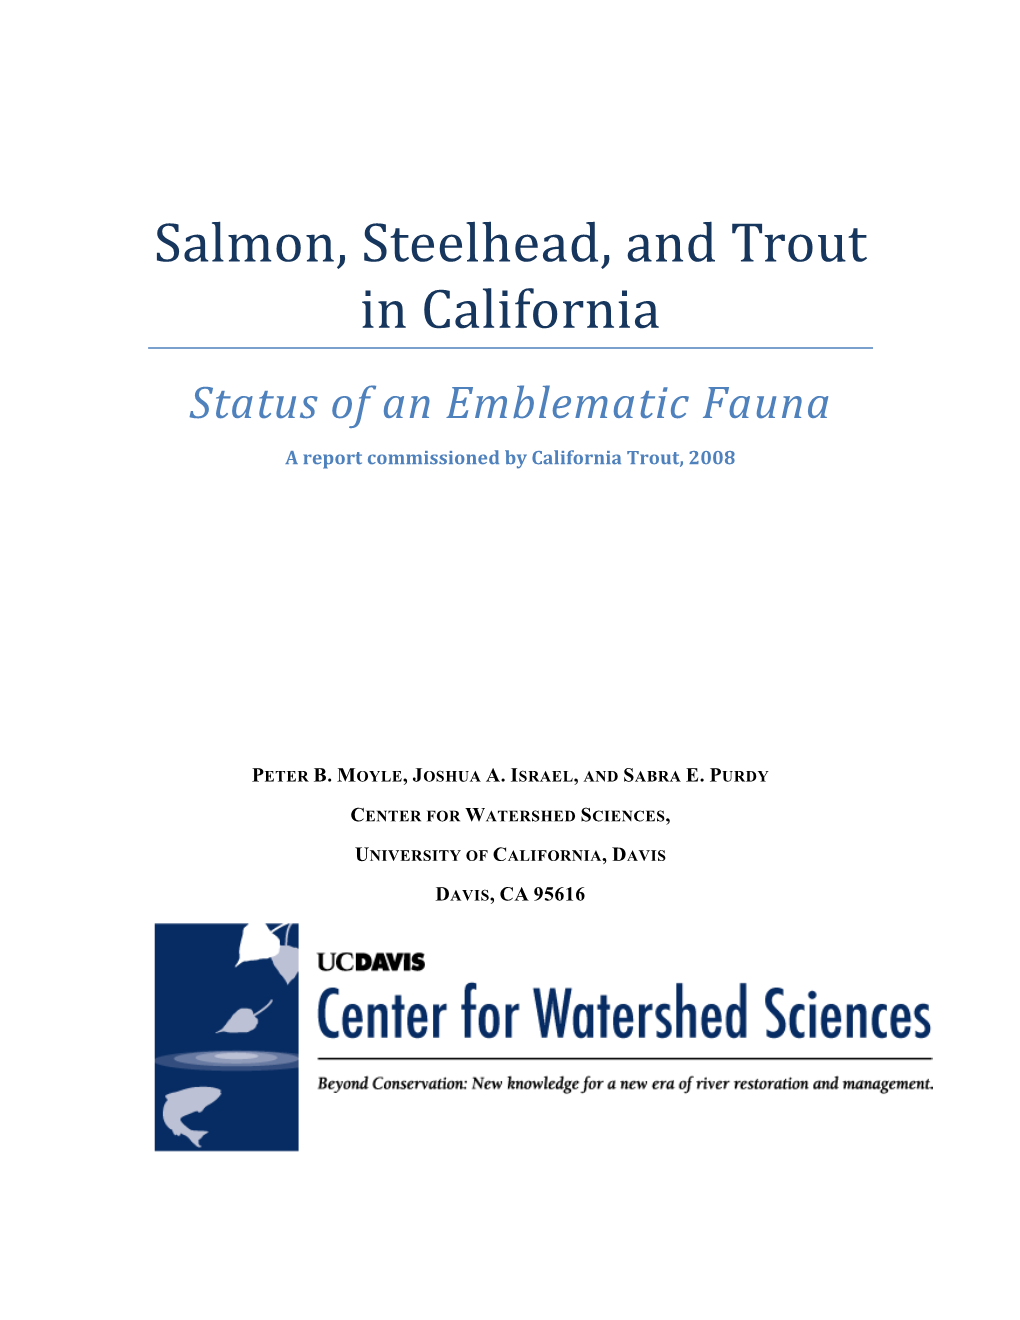 Salmon, Steelhead, and Trout in California Status of an Emblematic Fauna